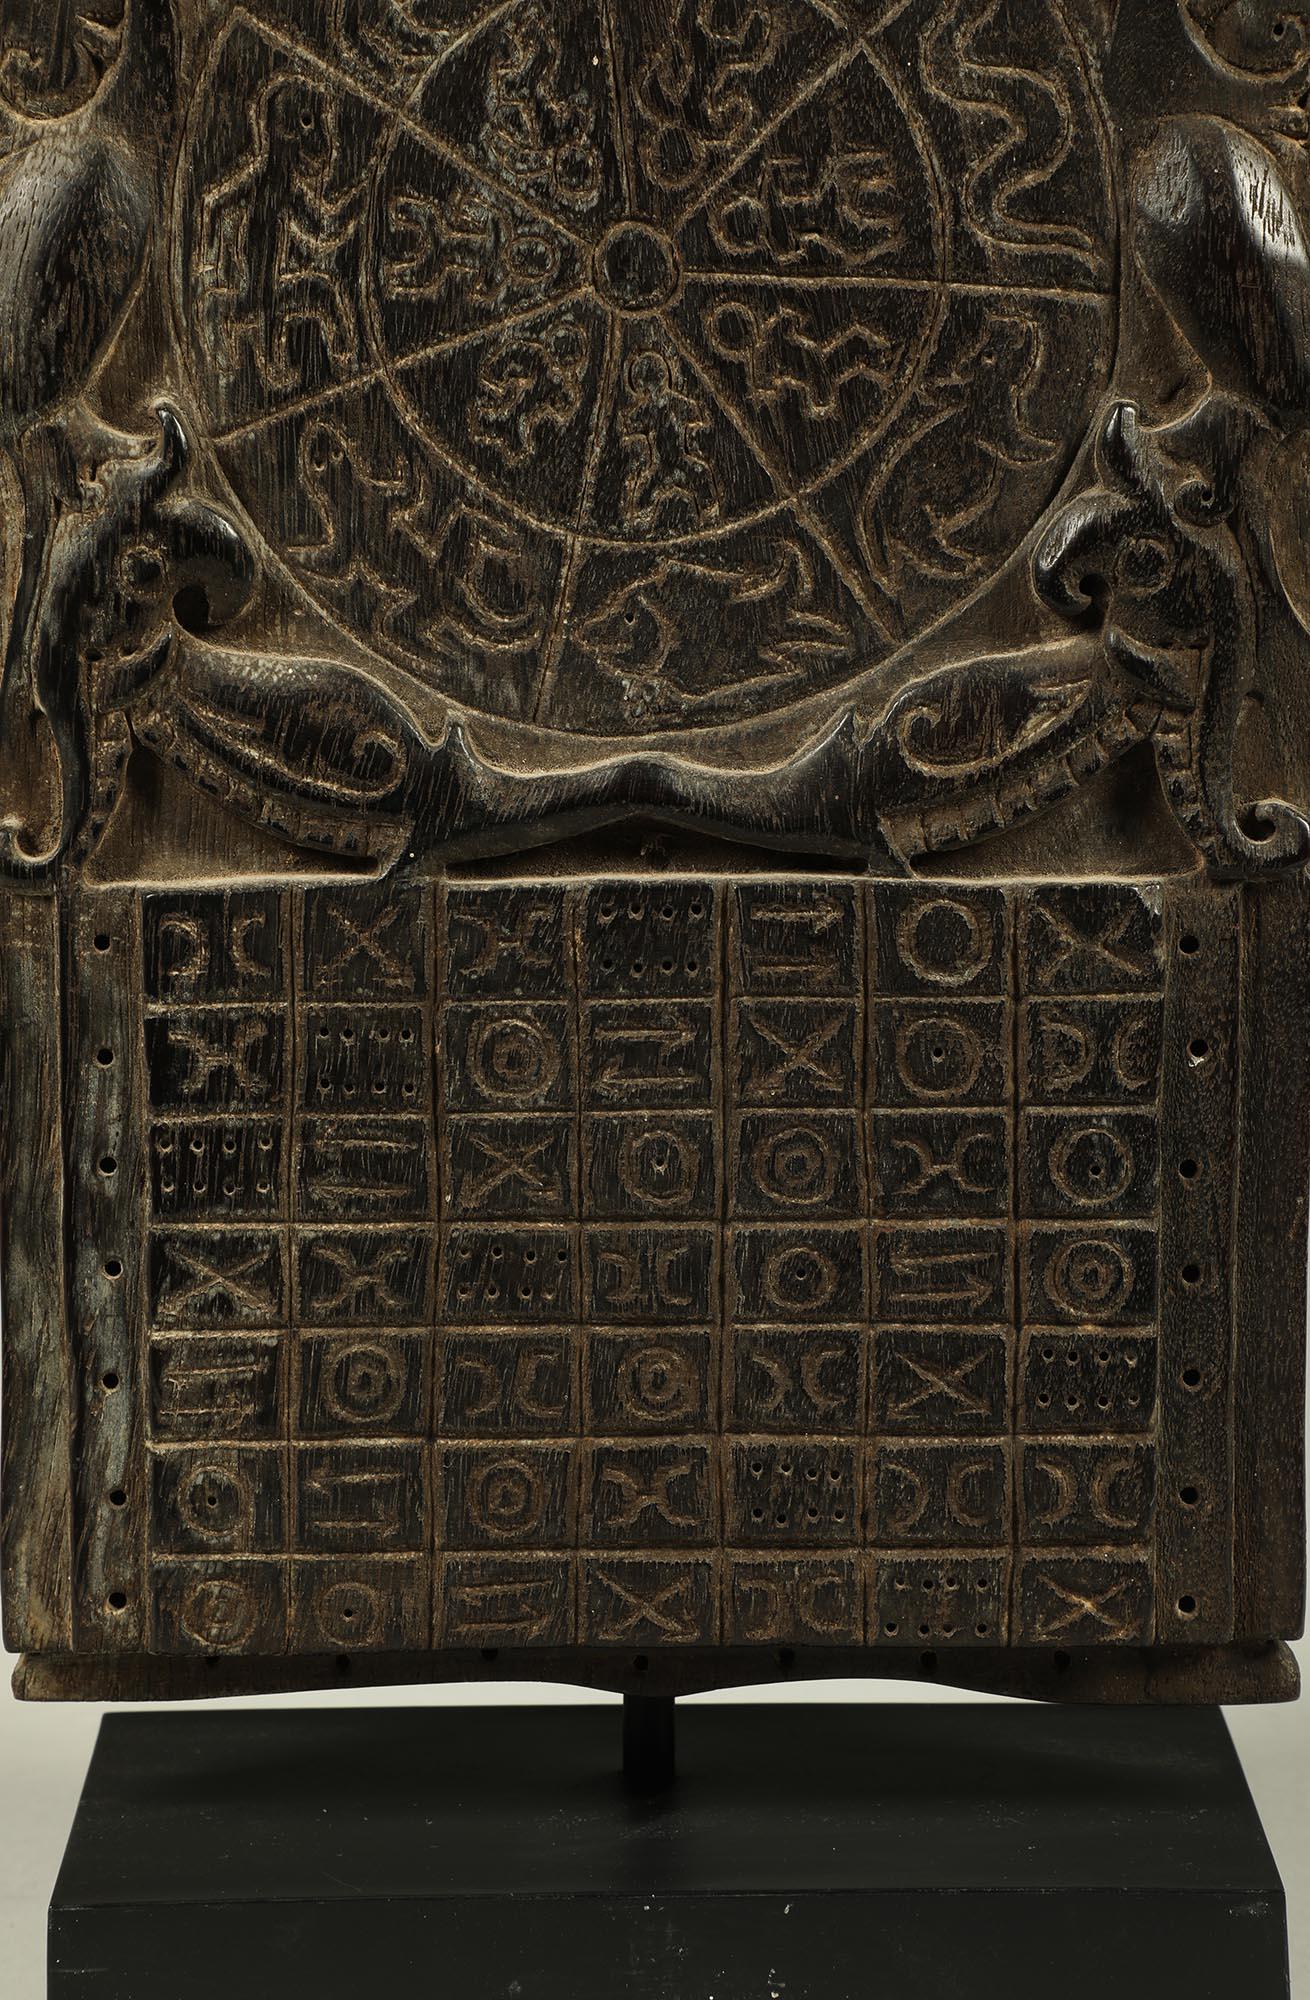 Hand-Carved Classic Dayak Wood Calendar Board with Aso or Dragon Motifs, Borneo Indonesia For Sale